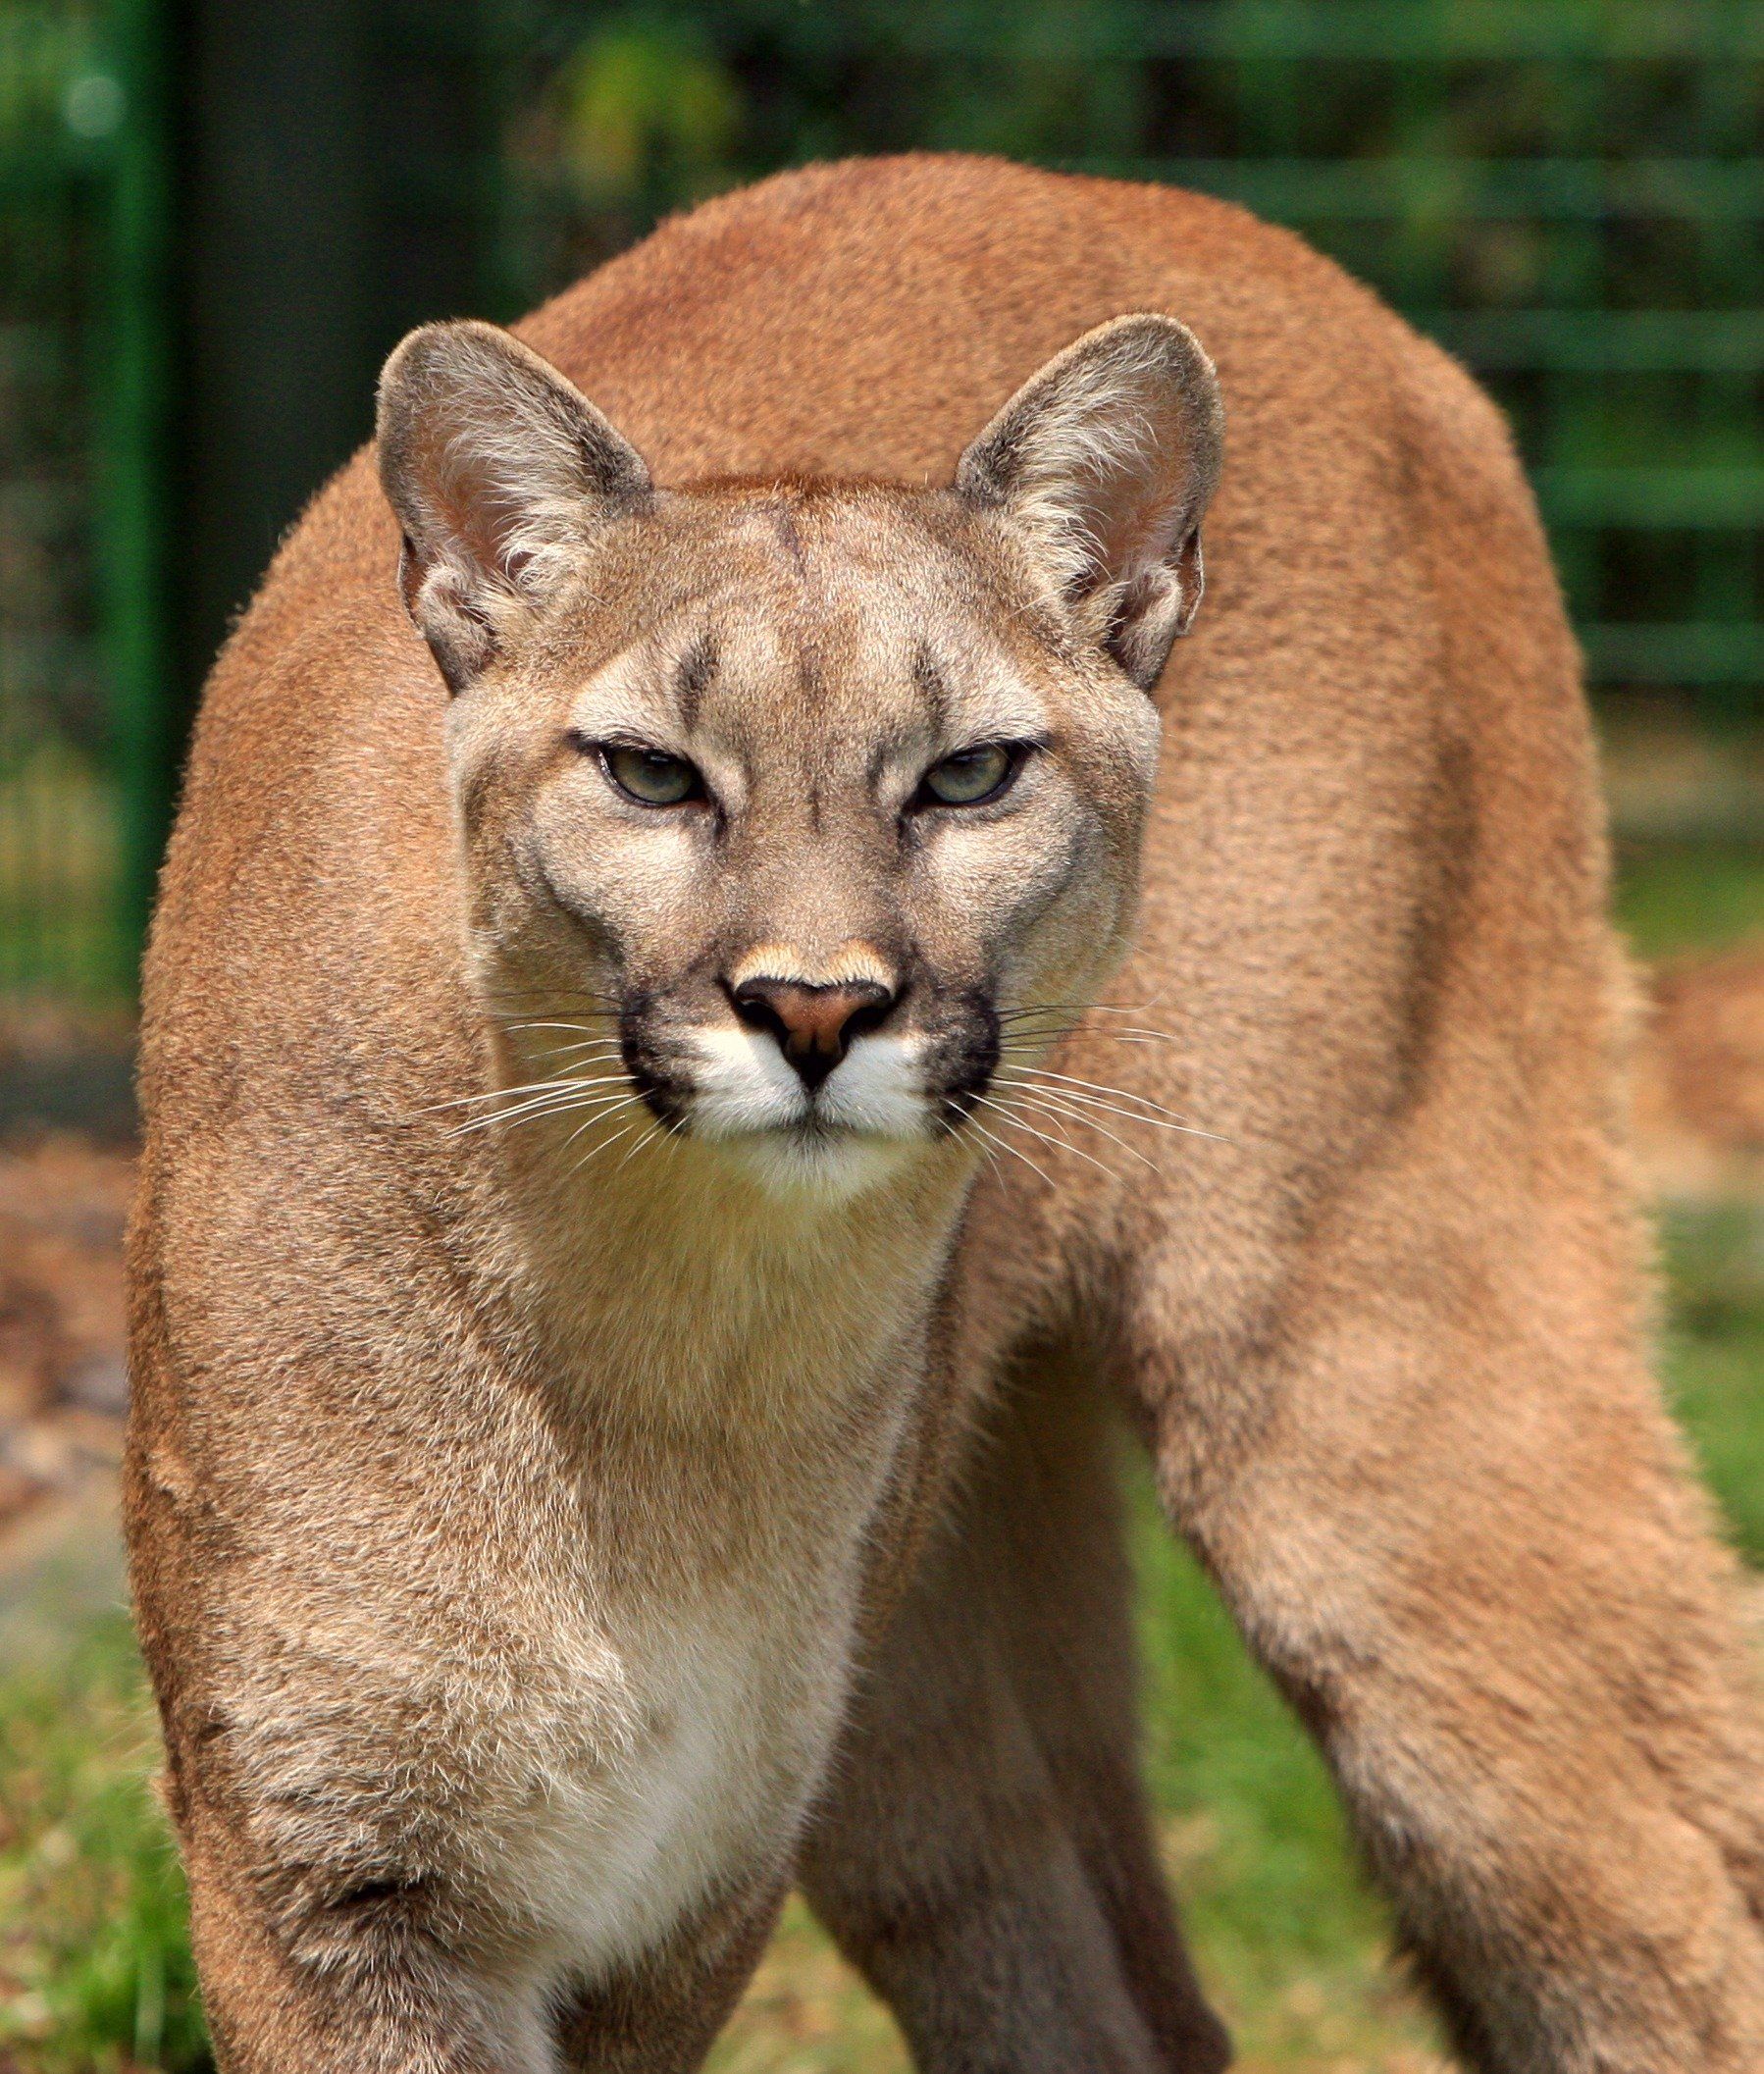 A close up of a mountain lion standing in the grass looking at the camera.